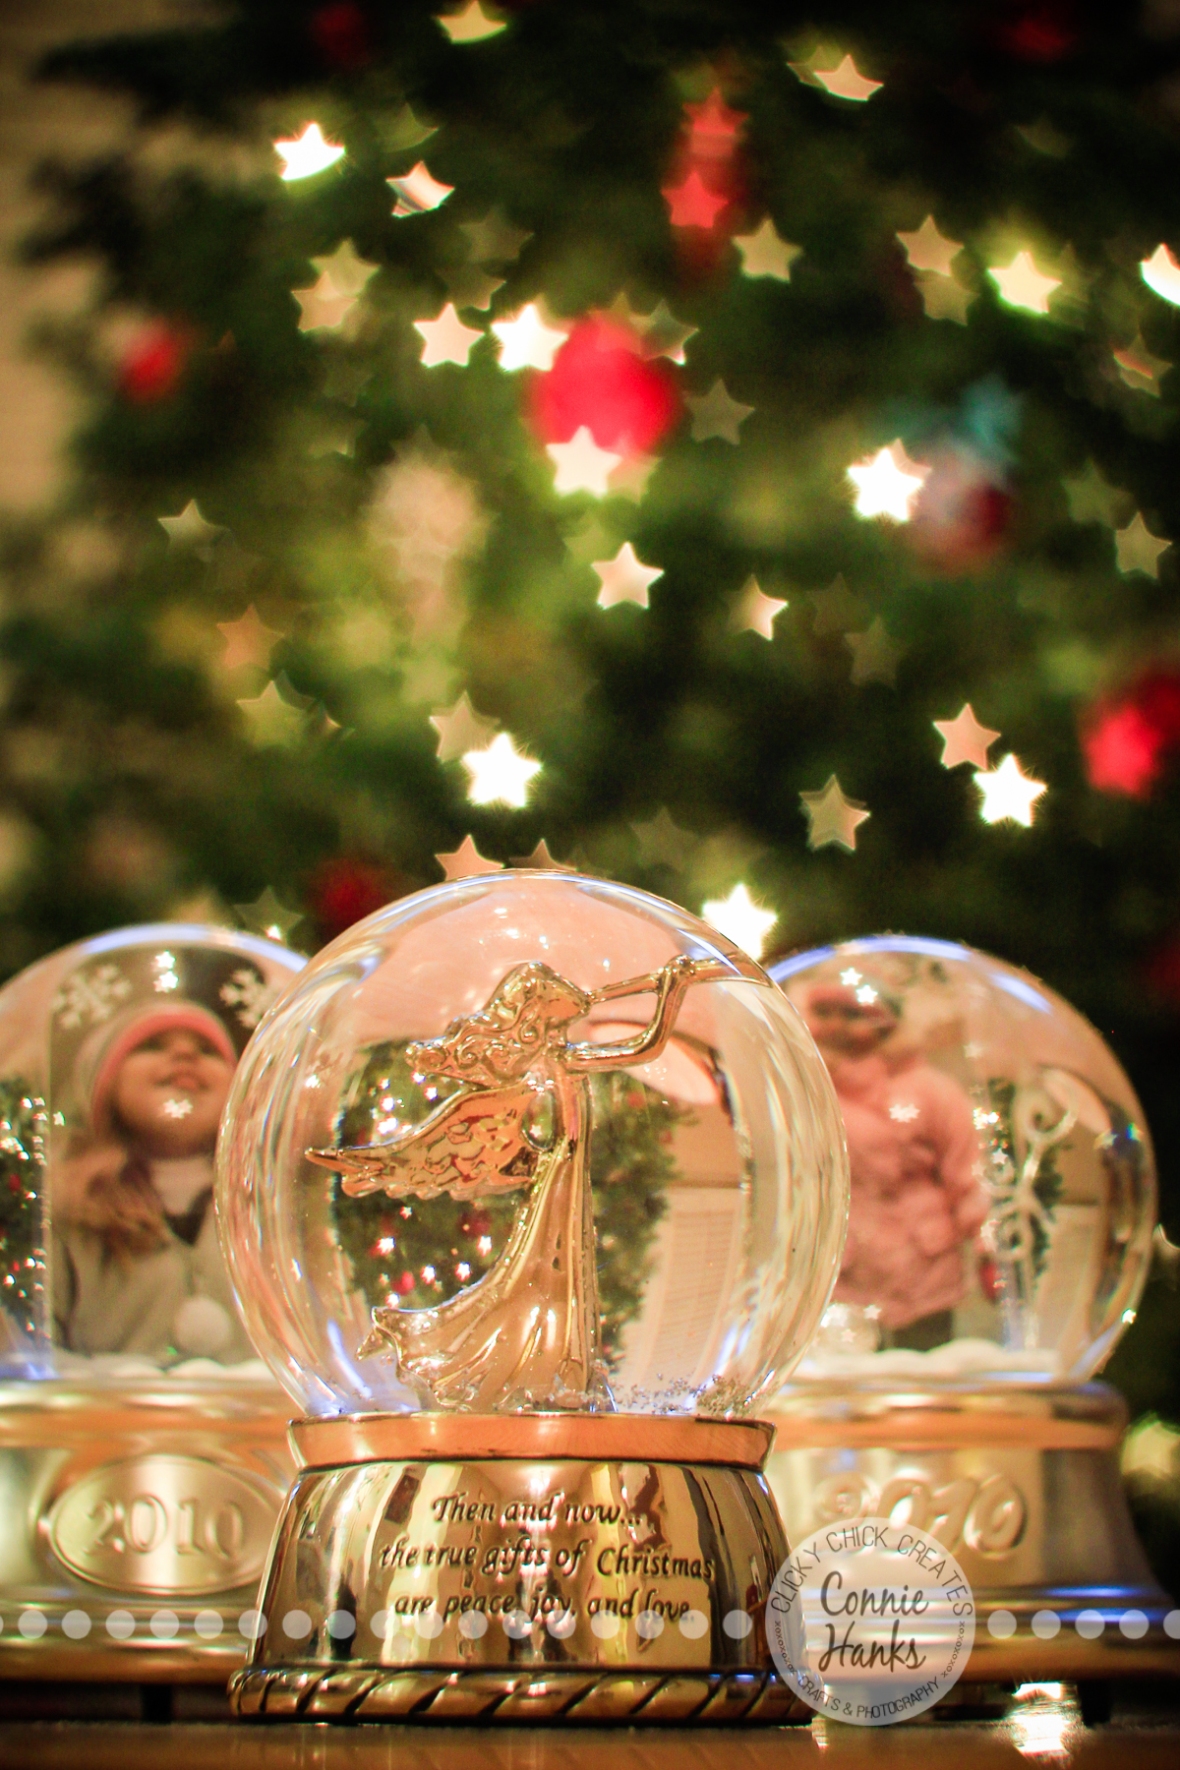 Connie Hanks Photography // ClickyChickCreates.com // Bokeh and twinkle filled snow globes, star bokeh, Christmas